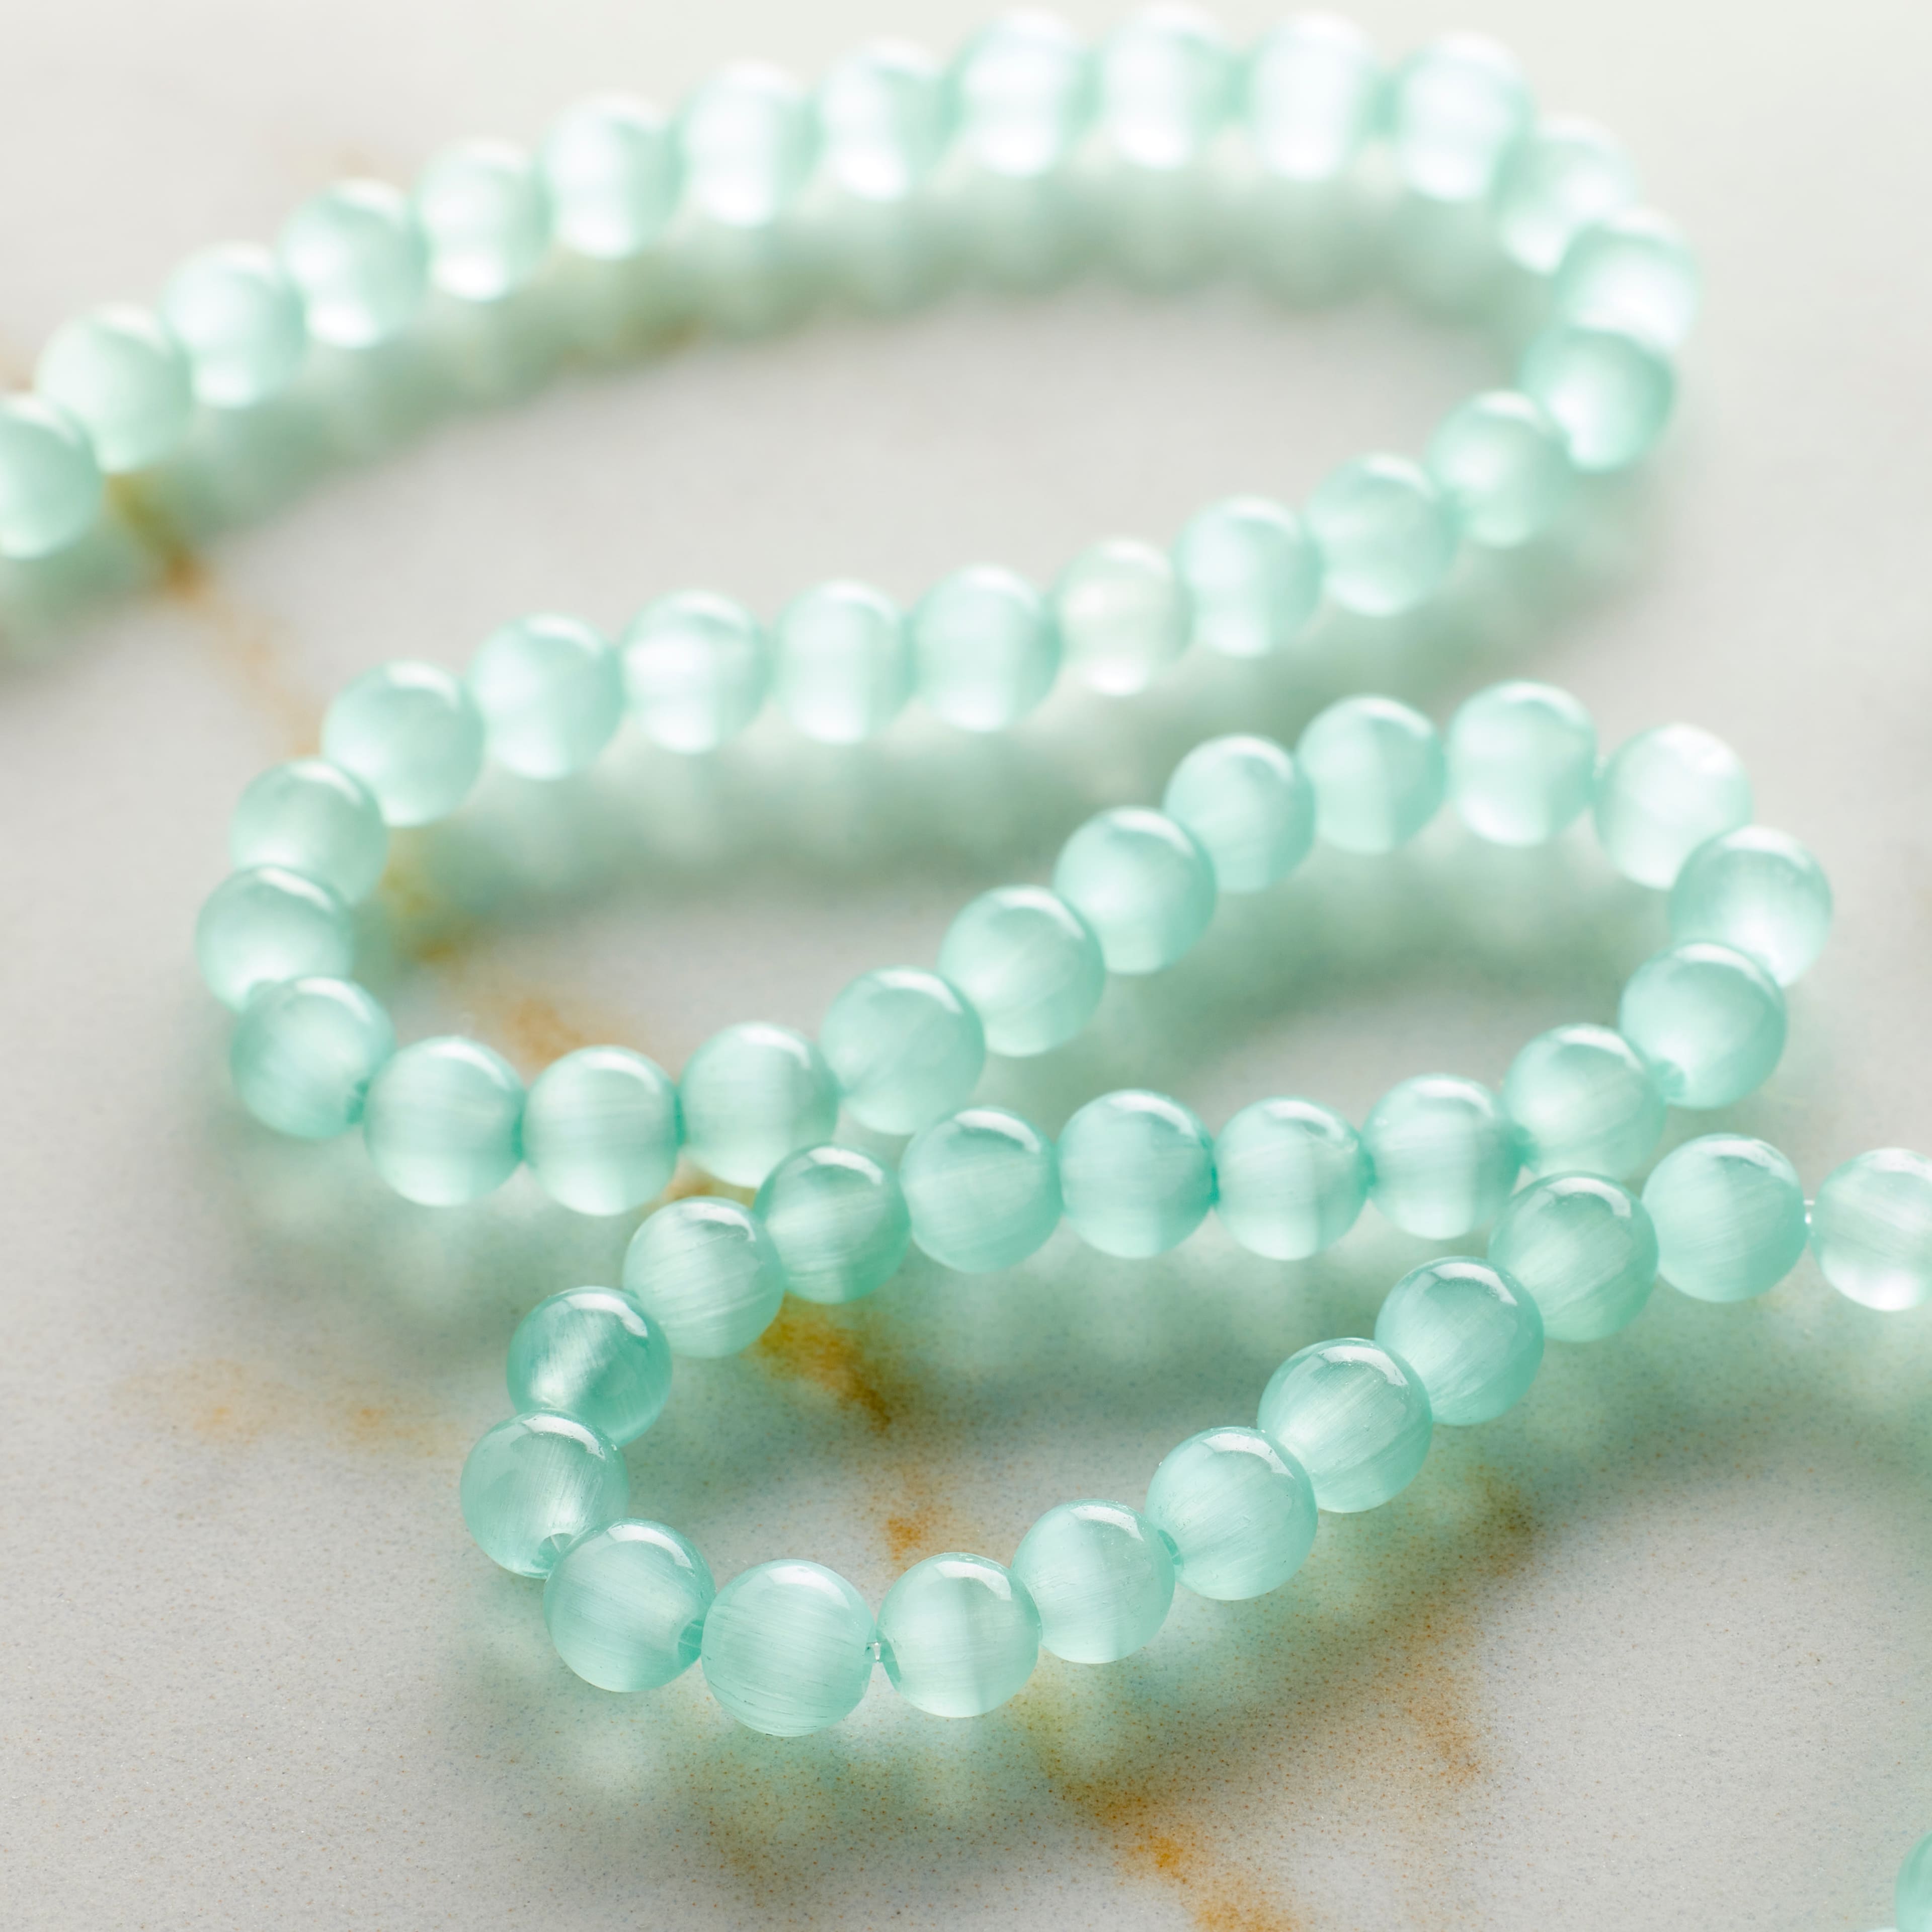 Glass and Pearl Beads Unique Necklace brought to life with Jade Cat Eyes